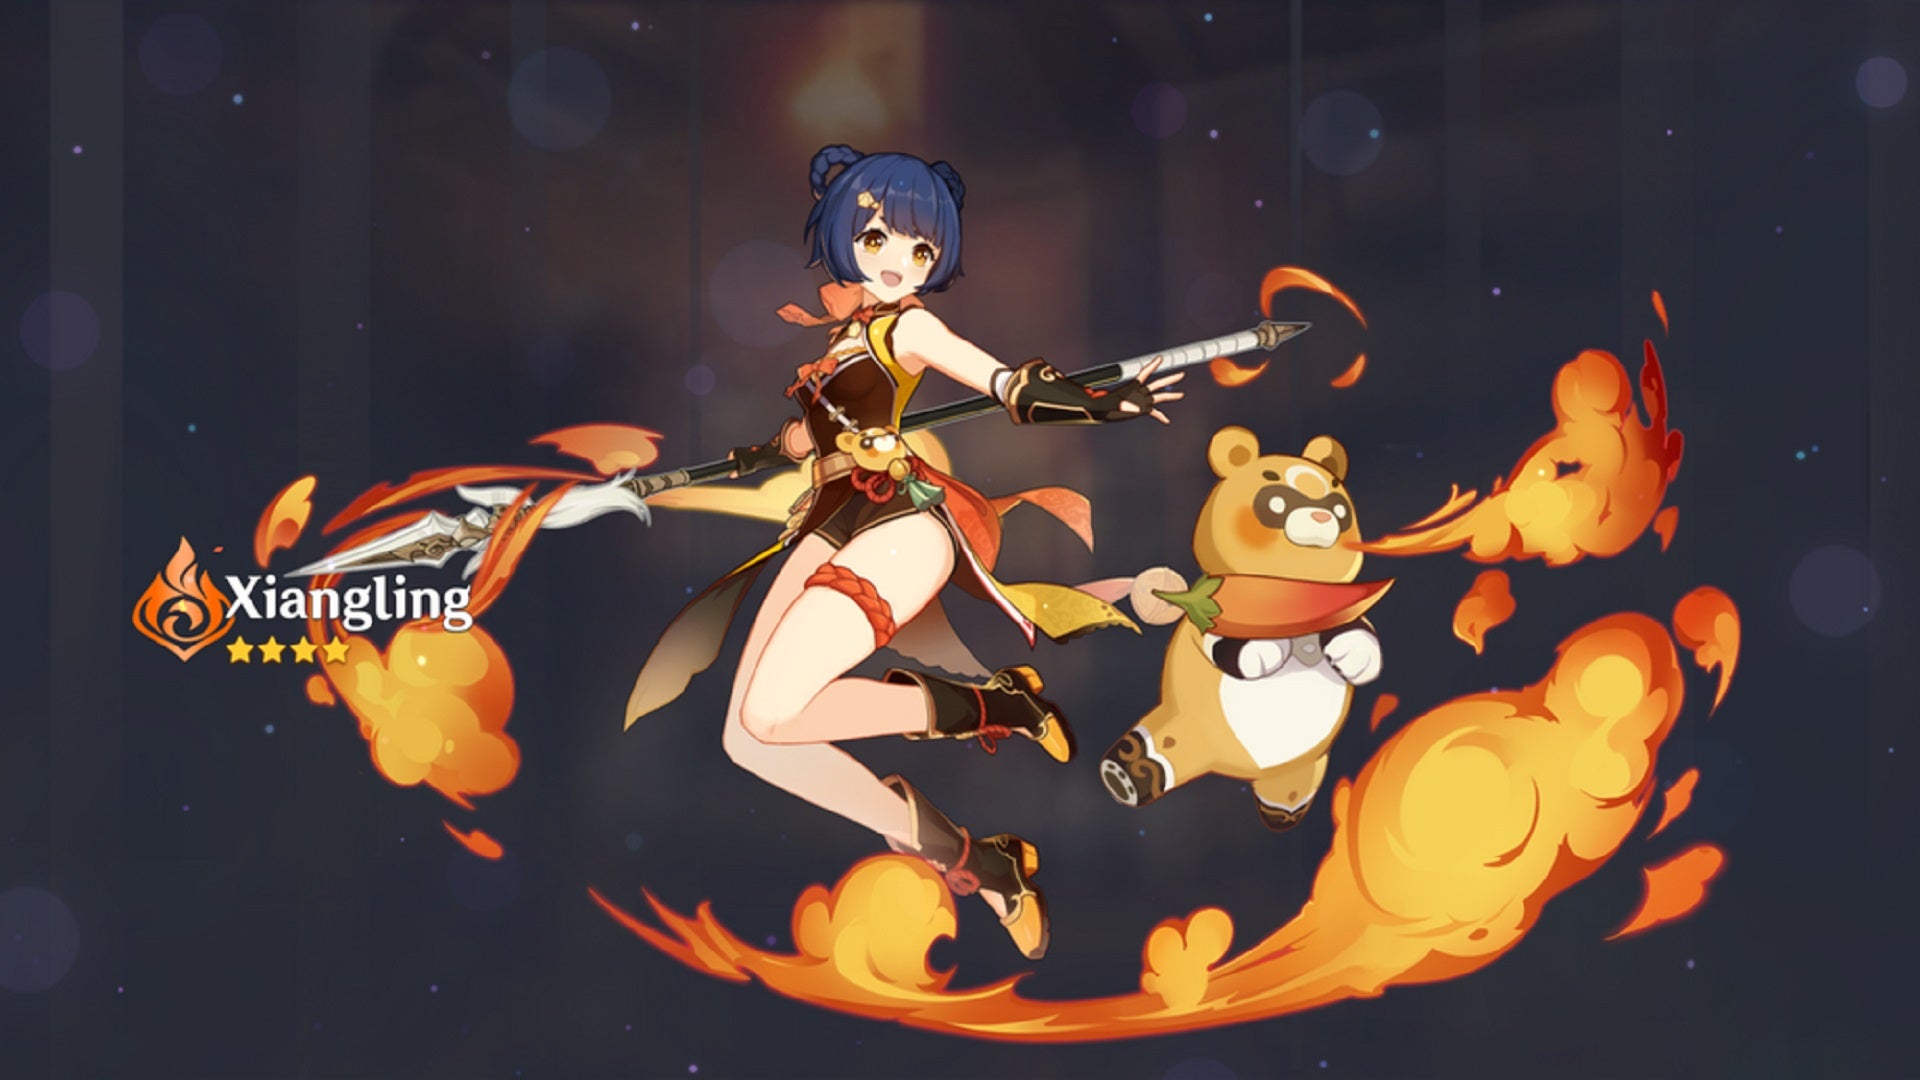 Xiangling from Genshin Impact and her companion Guoba being summoned in the gacha.